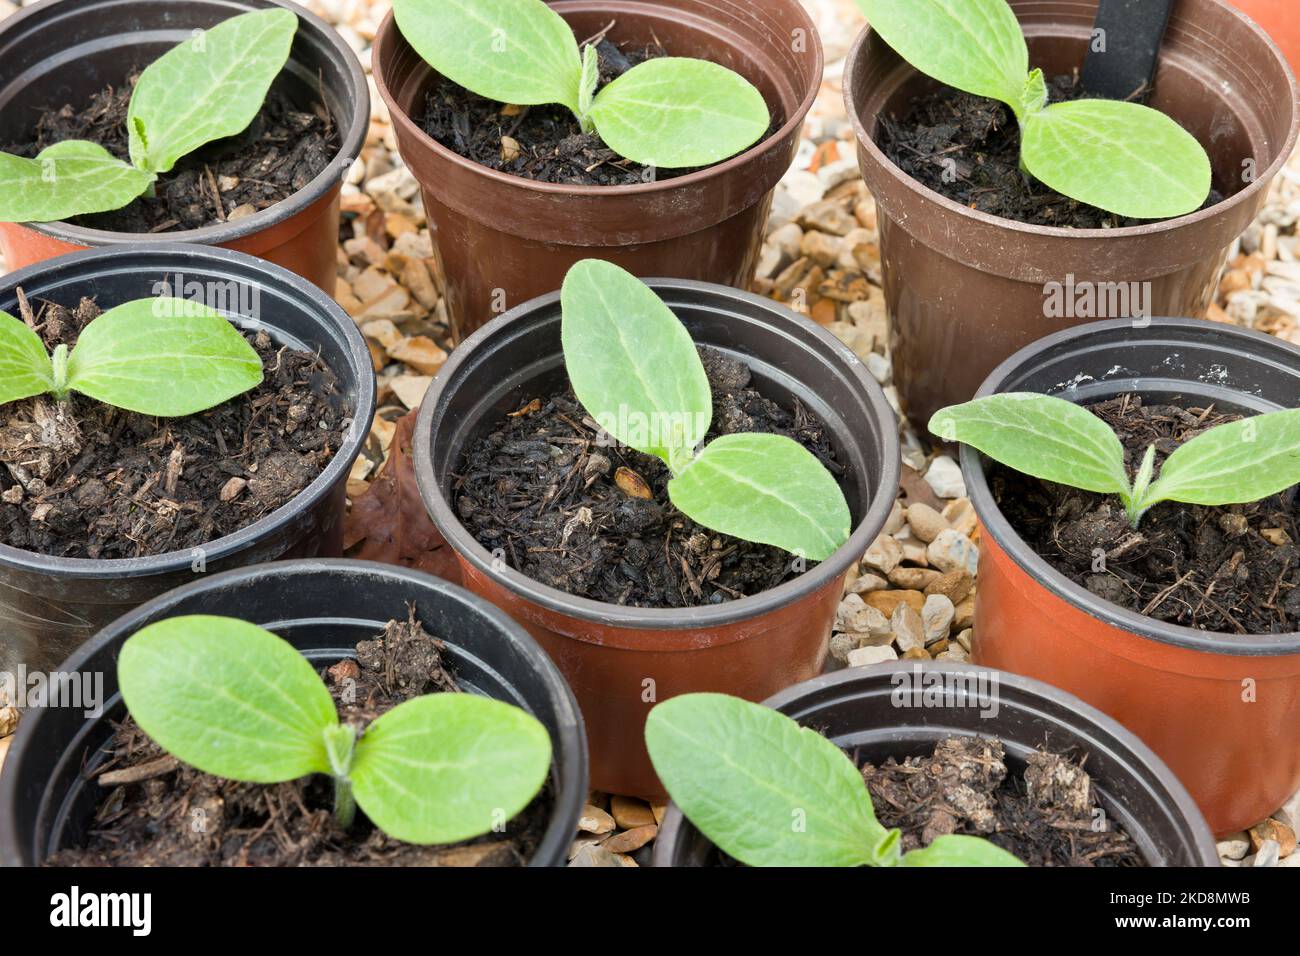 Young zucchini plants (courgettes) growing in pots. Vegetable seedlings, UK Stock Photo